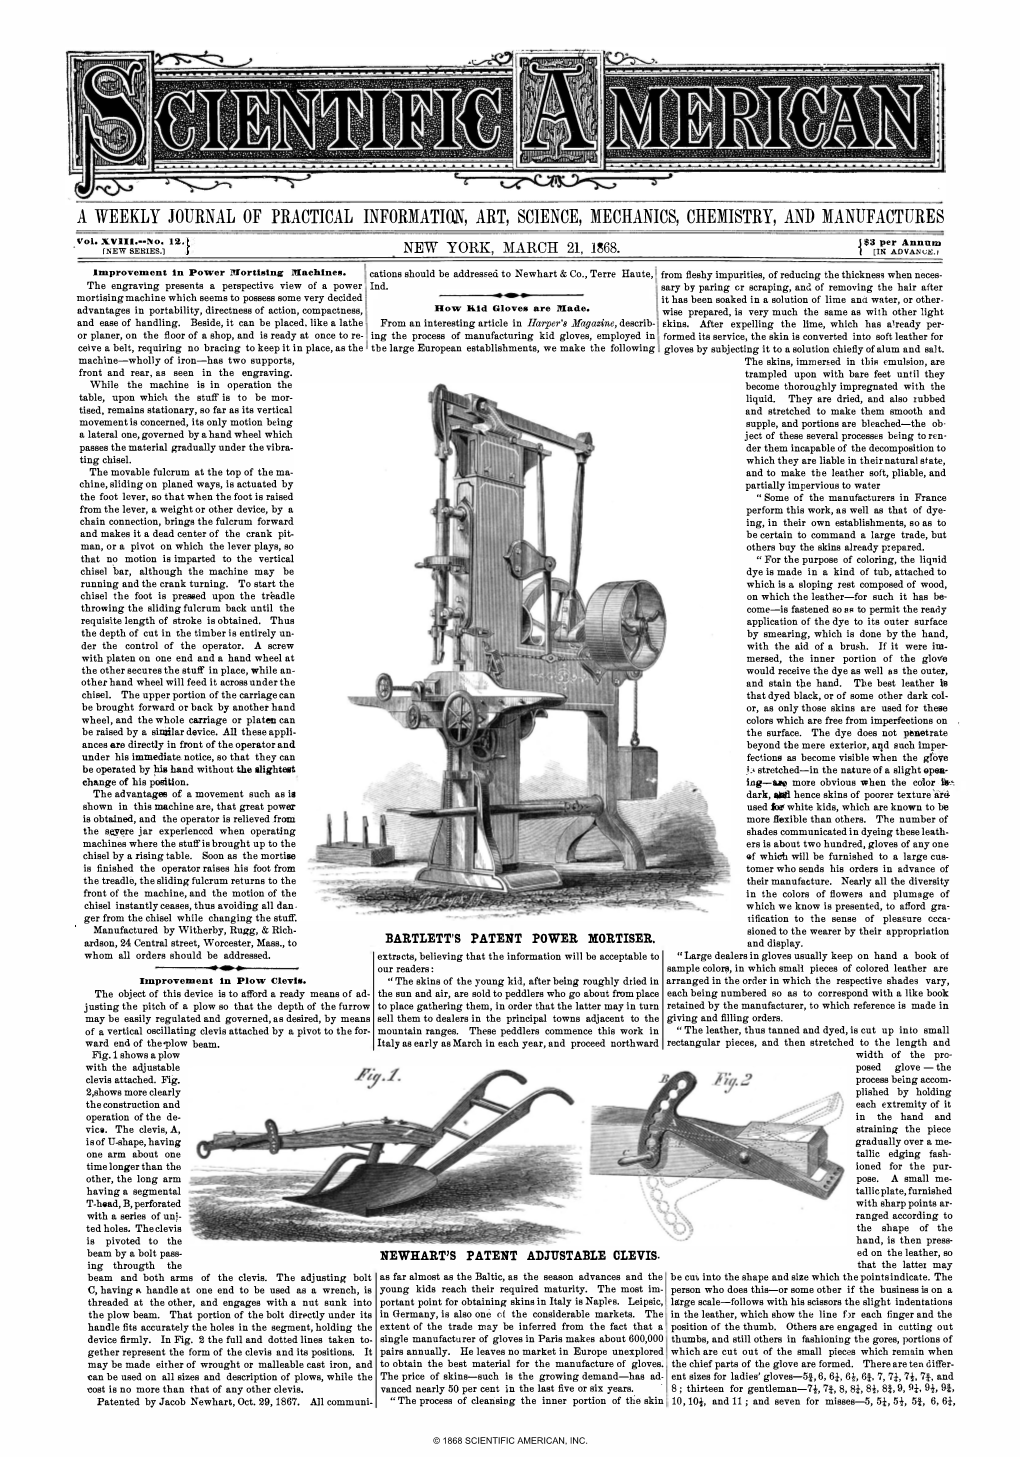 A Weekly Journal of Practical Information, Art, Science, Mechanics, Chemistry, and Manufactures